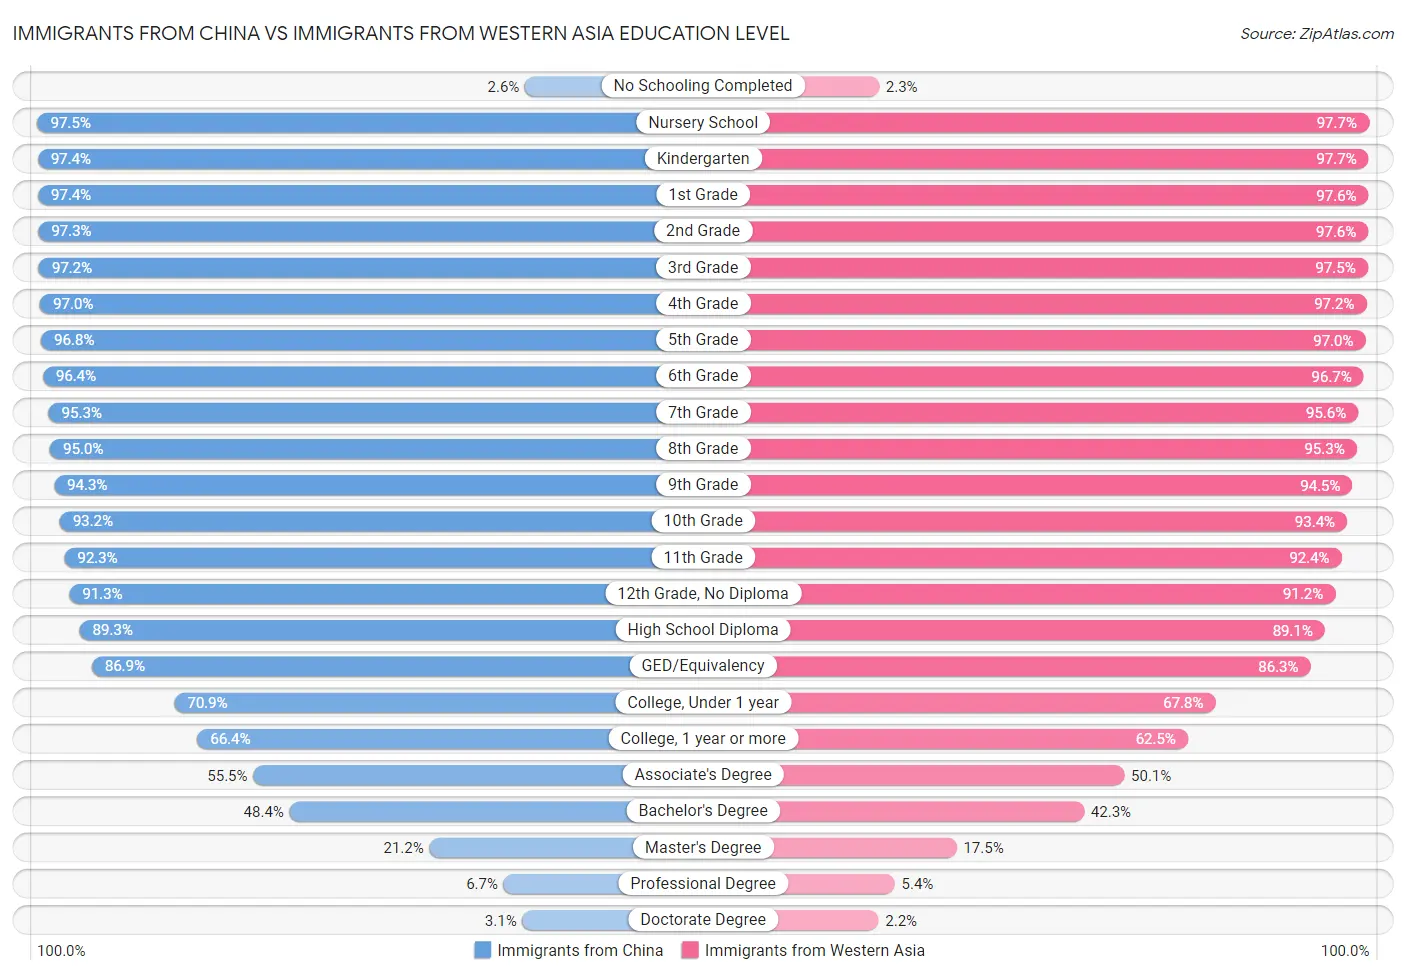 Immigrants from China vs Immigrants from Western Asia Education Level